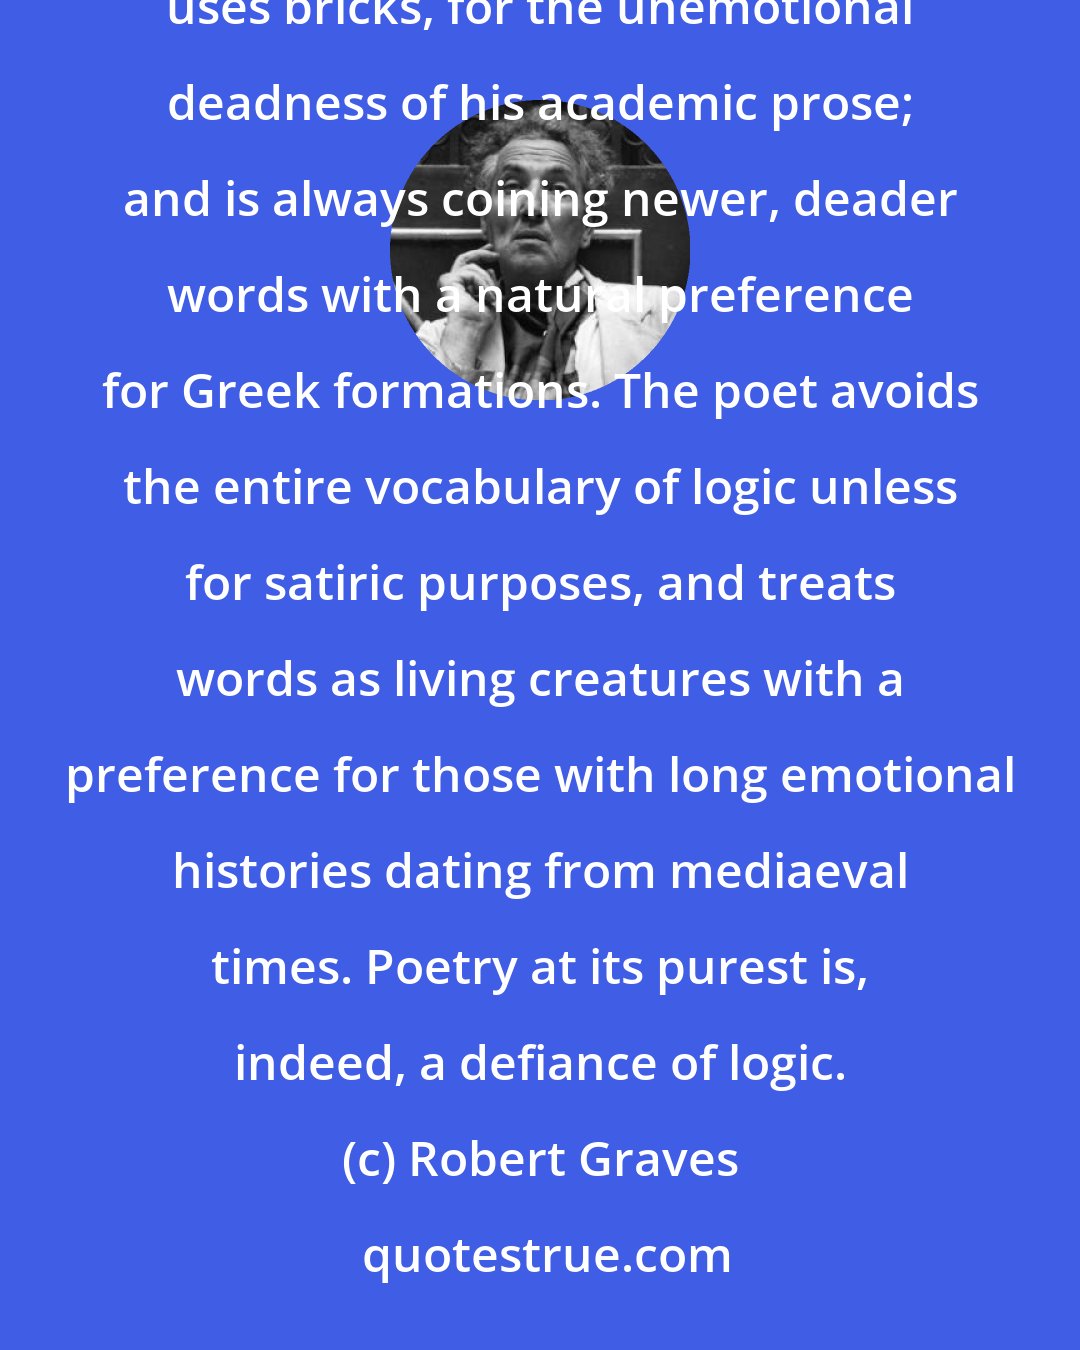 Robert Graves: The difference between prose logic and poetic thought is simple. The logician uses words as a builder uses bricks, for the unemotional deadness of his academic prose; and is always coining newer, deader words with a natural preference for Greek formations. The poet avoids the entire vocabulary of logic unless for satiric purposes, and treats words as living creatures with a preference for those with long emotional histories dating from mediaeval times. Poetry at its purest is, indeed, a defiance of logic.